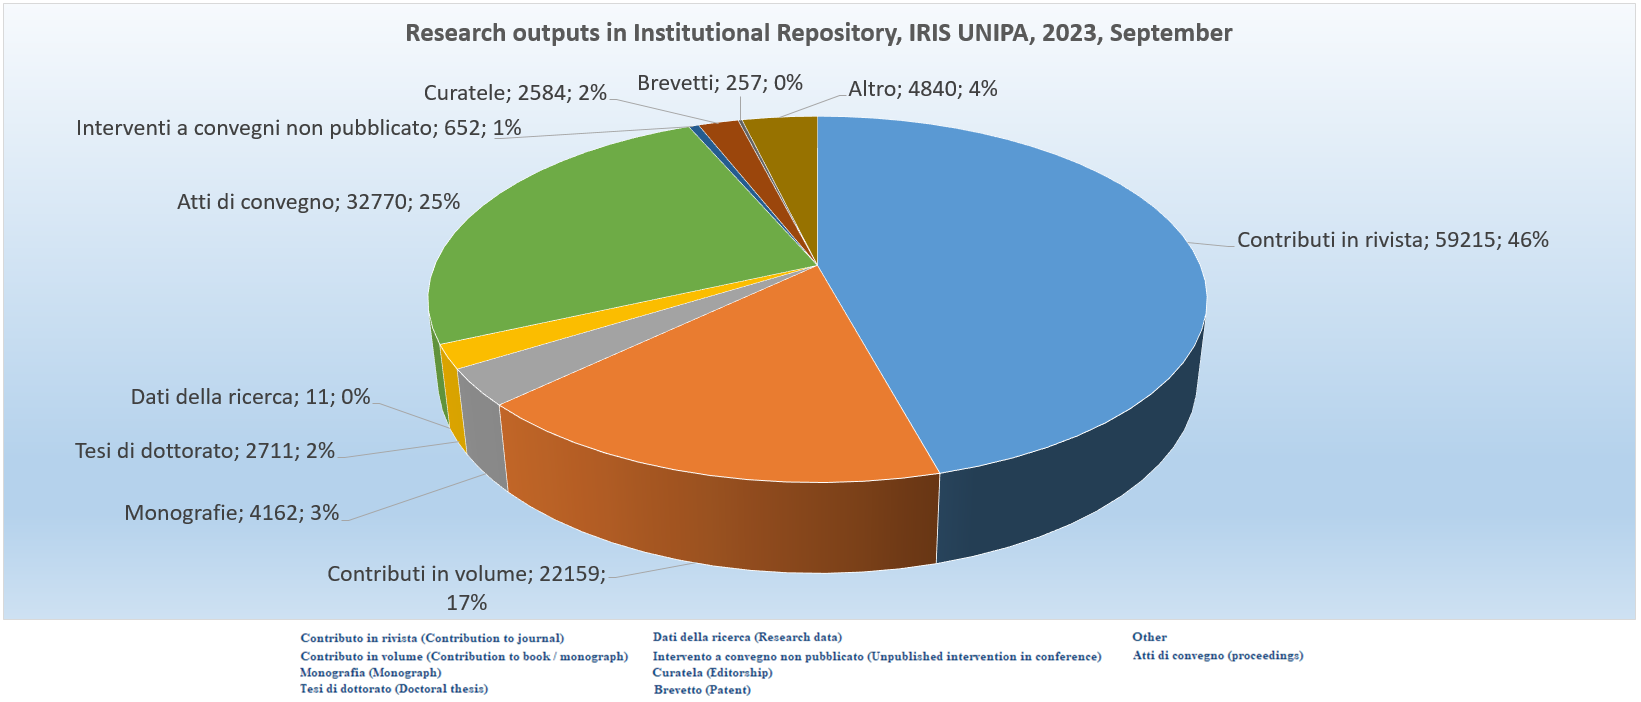 Research outputs in IRIS UniPA at September, 2023